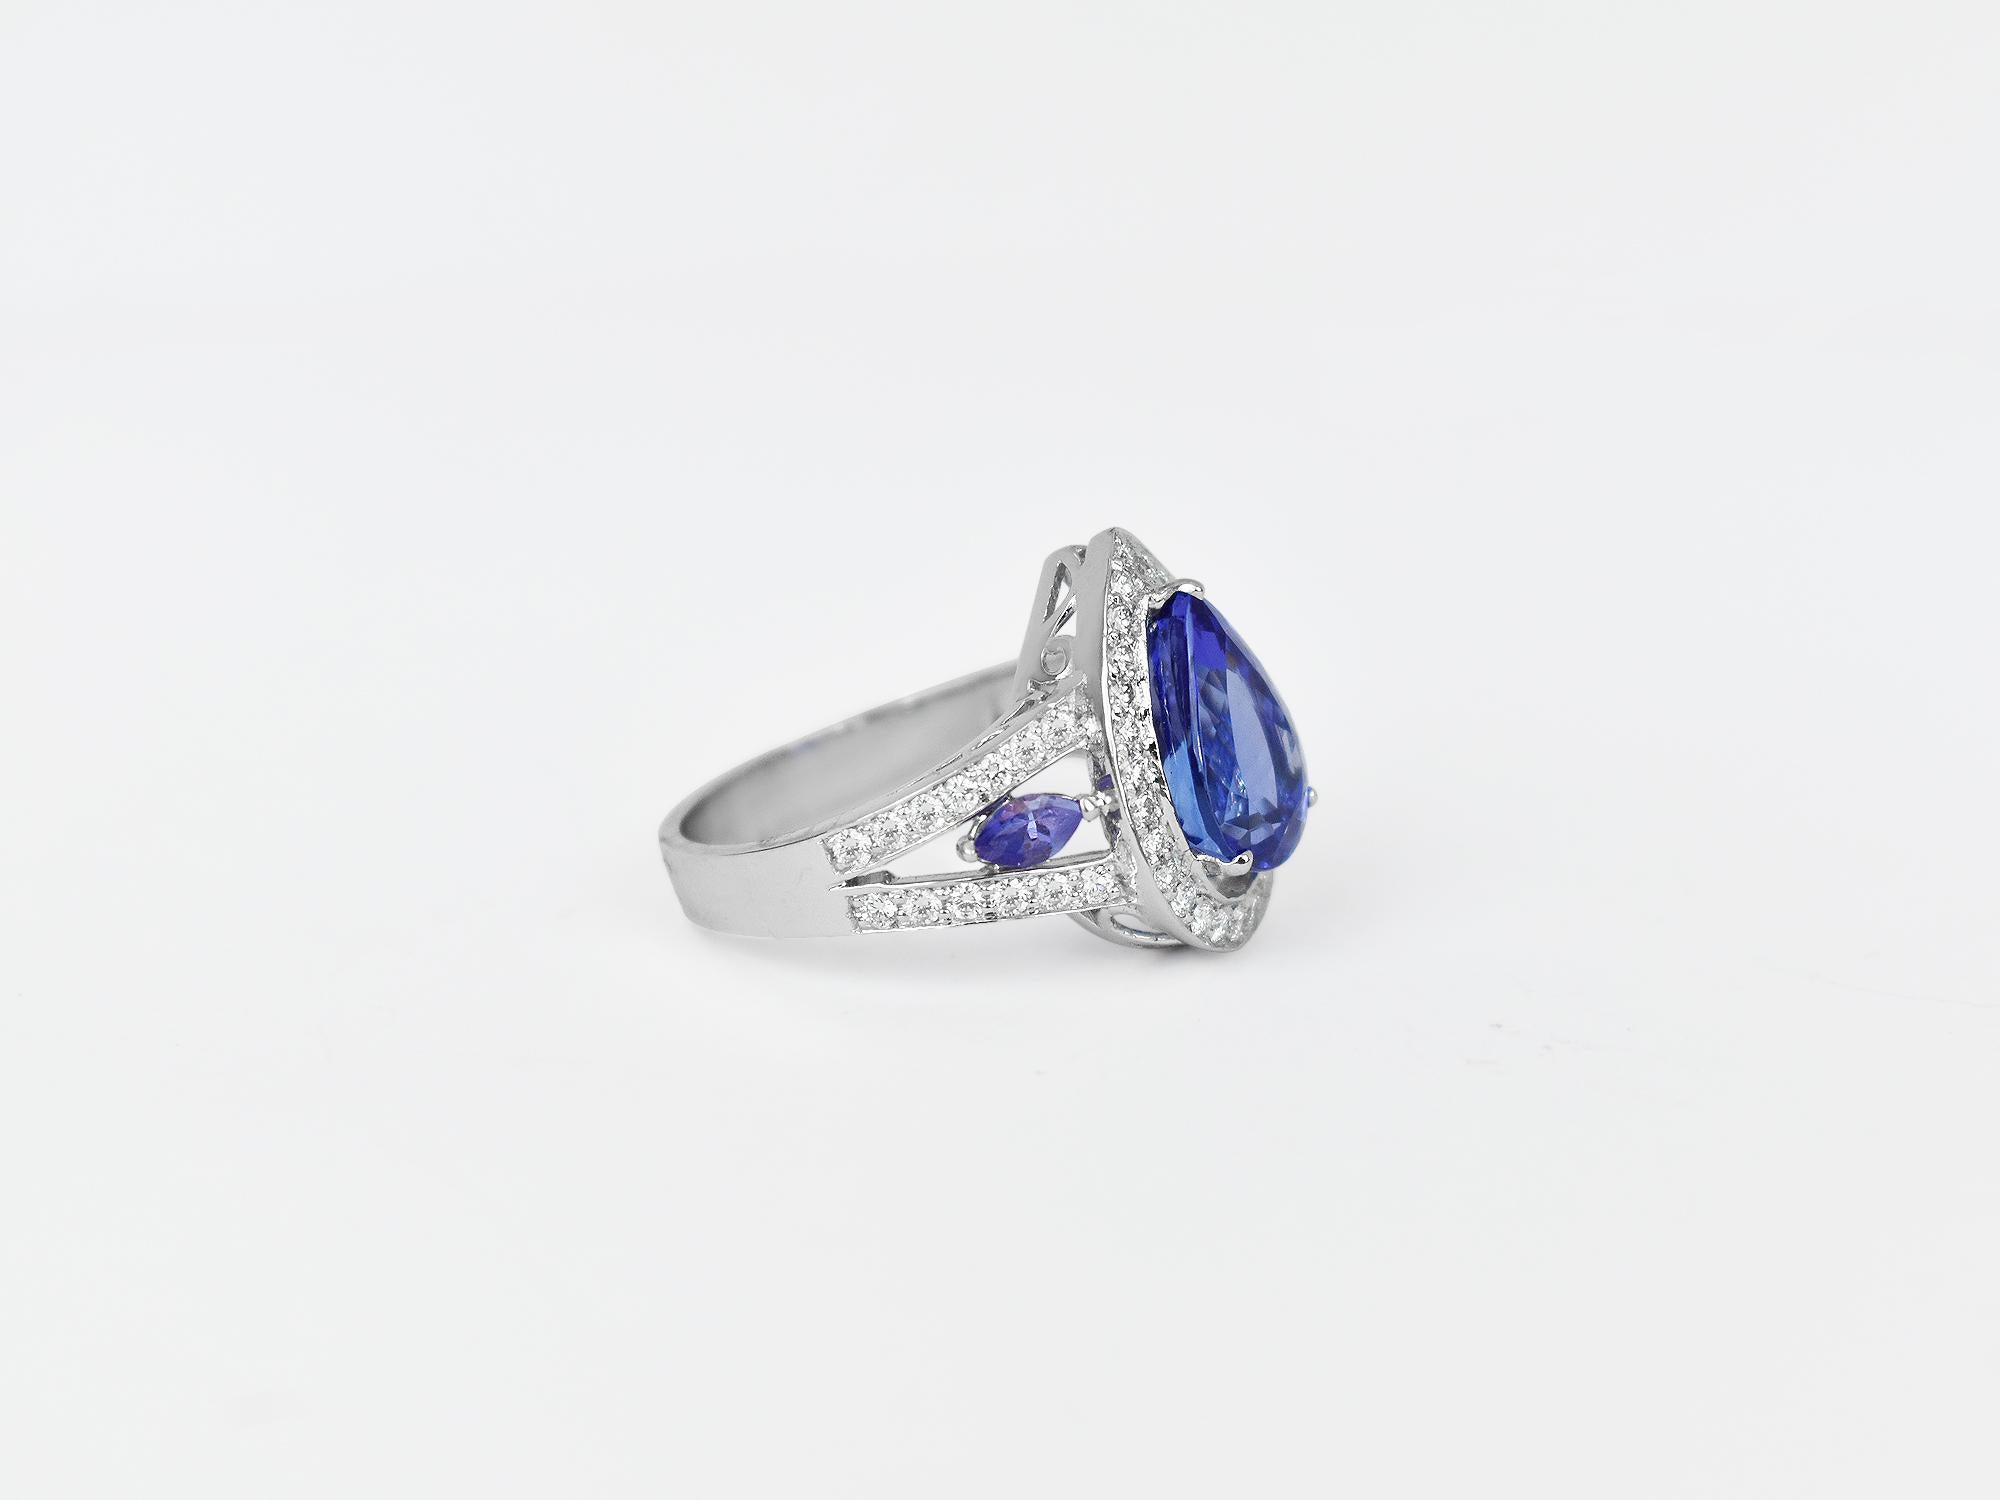 18k Ring White Gold Ring Diamond Ring  Tanzanite Ring Blue Tanzanite Pear Shape Ring  
     This 18K solid white Gold Tanzanite / Diamond bezel halo ring. The fine Quality gold finishing with pear shape Tanzanite & scintillating cluster pave set